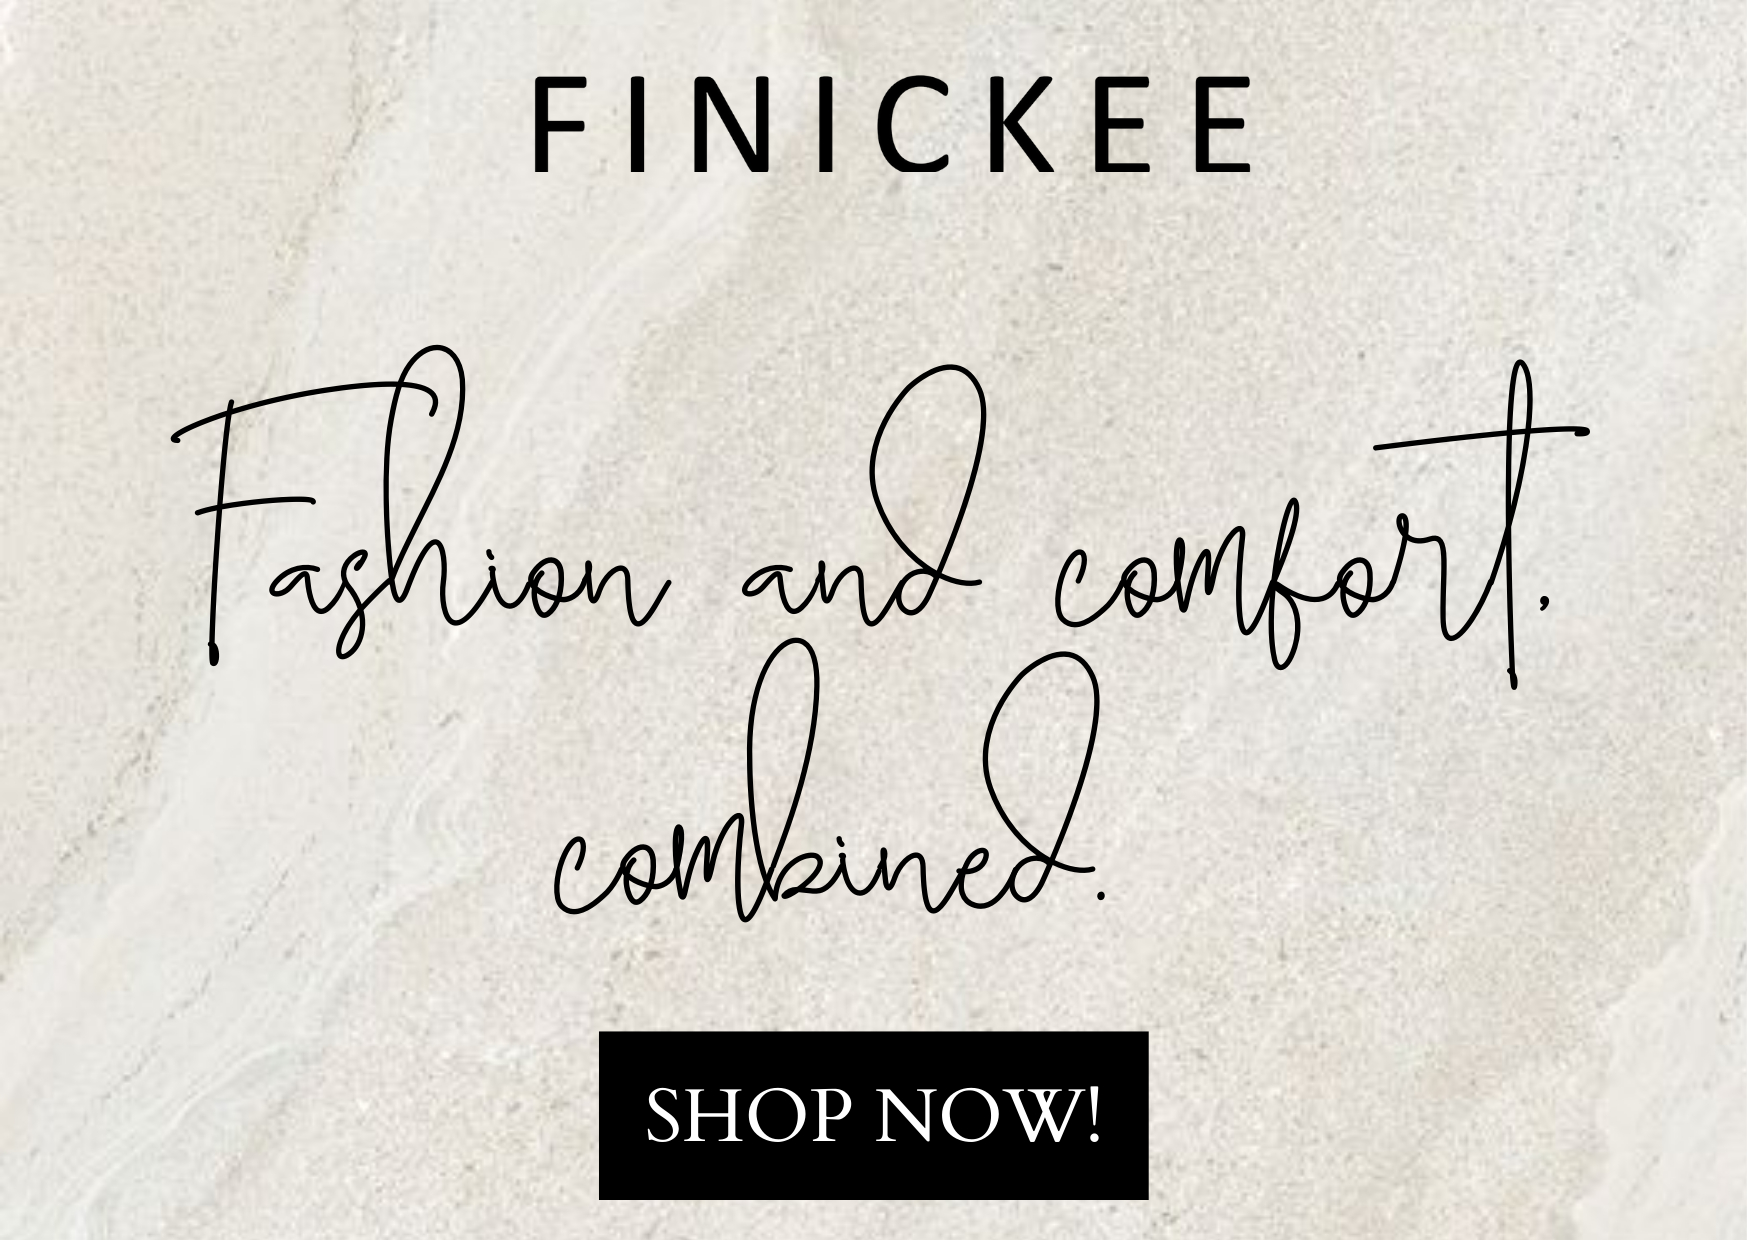 FINICKEE SHOES, Online Shop | Shopee Philippines